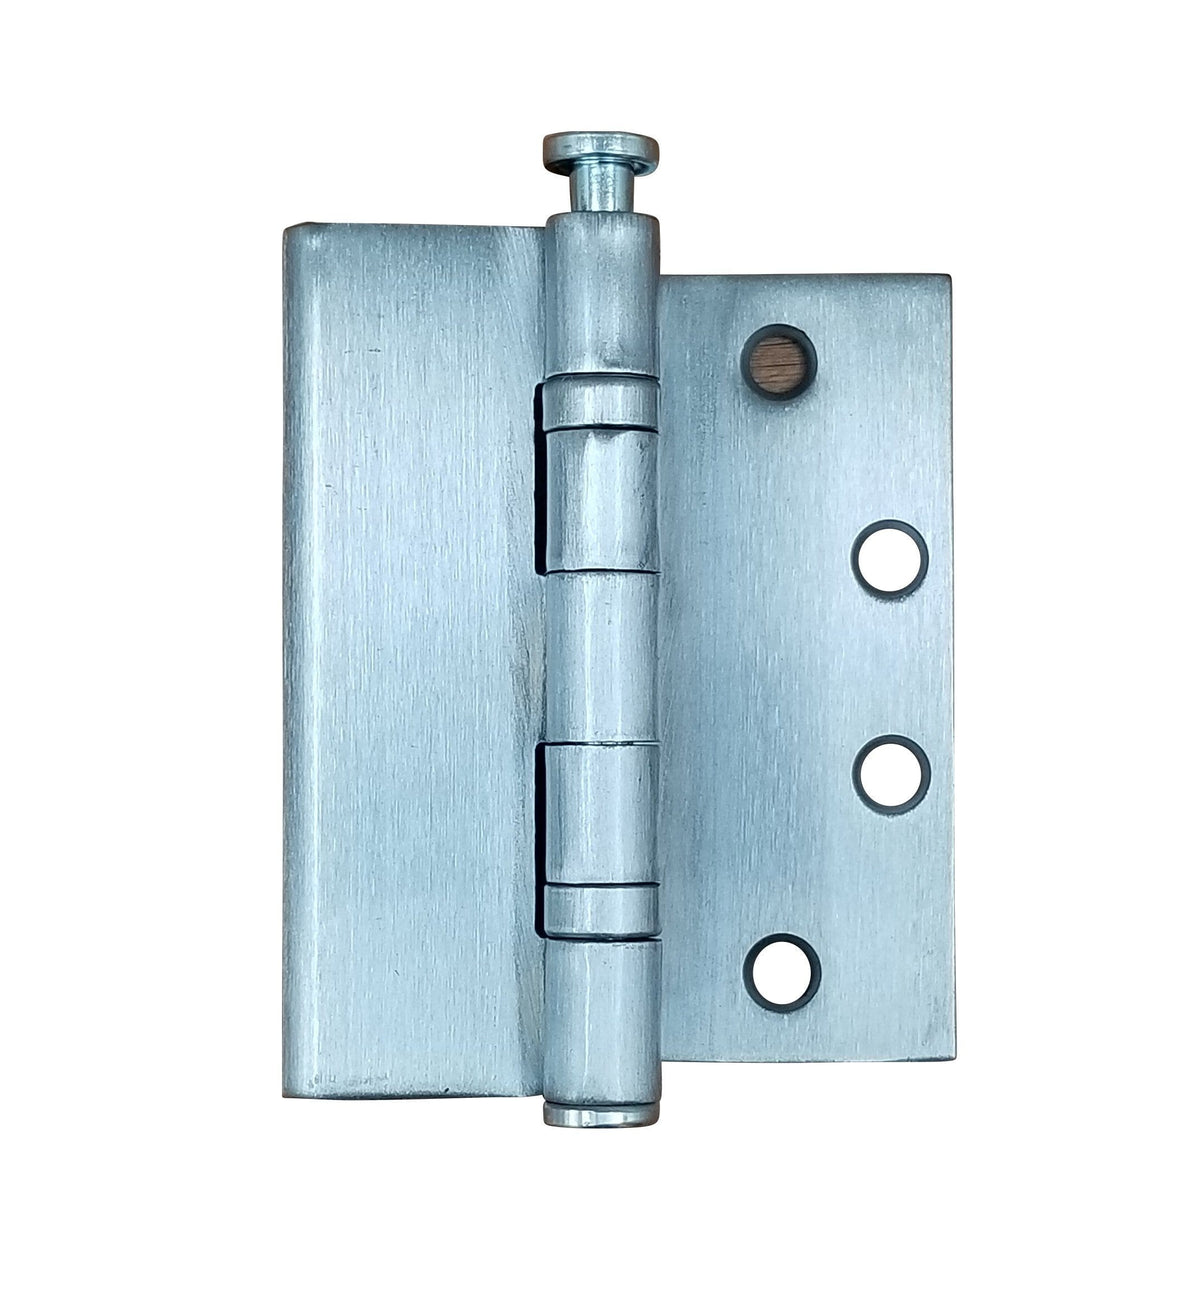 Swing Clear Hinges - Swing Clear Standard Weight Ball Bearing Door Hinges - 4.5" - Full Mortise - Satin Chrome - Sold Individually